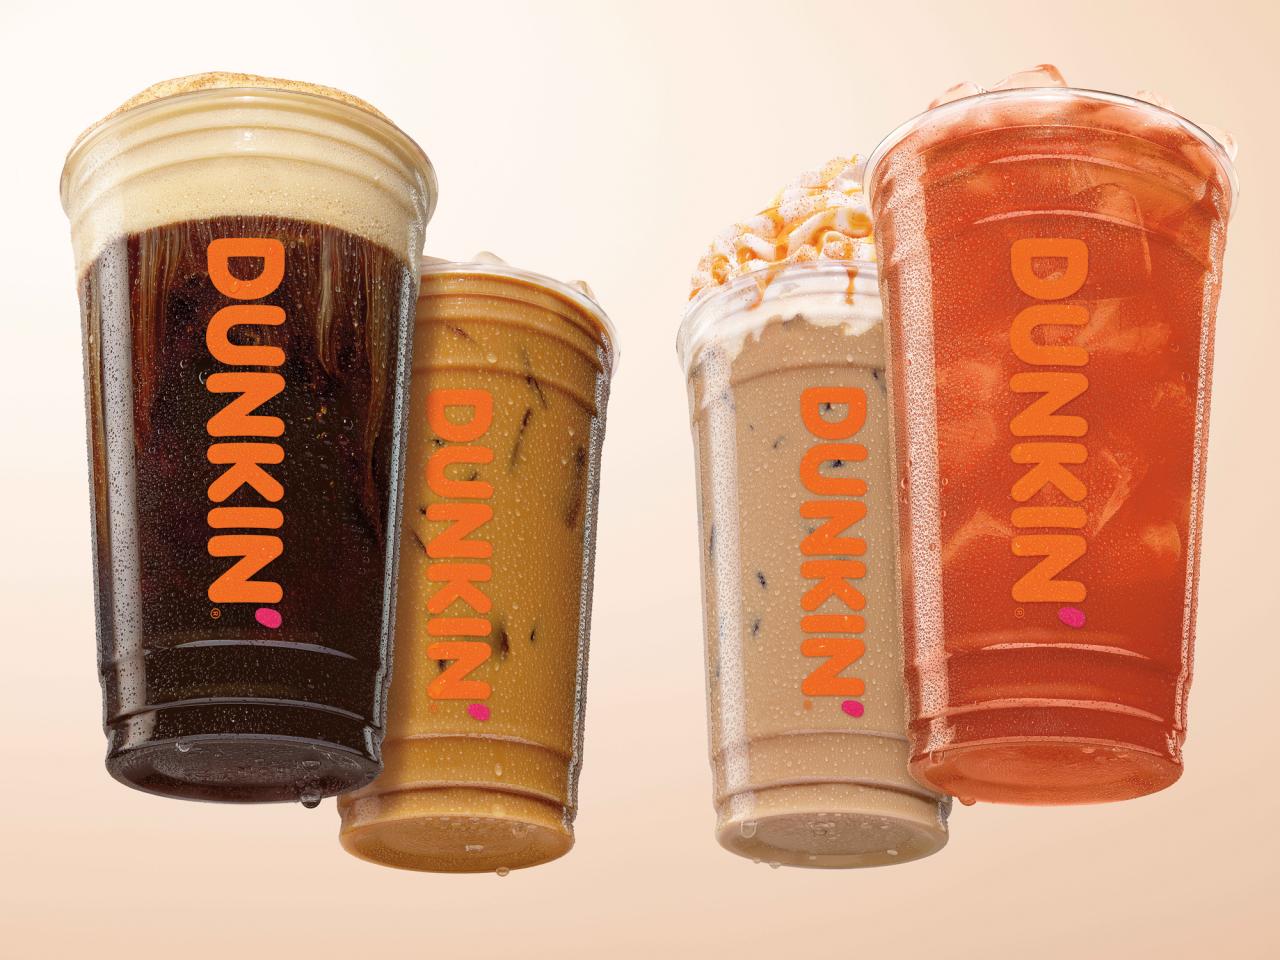 Dunkin' Donuts Cold Brew Coffee